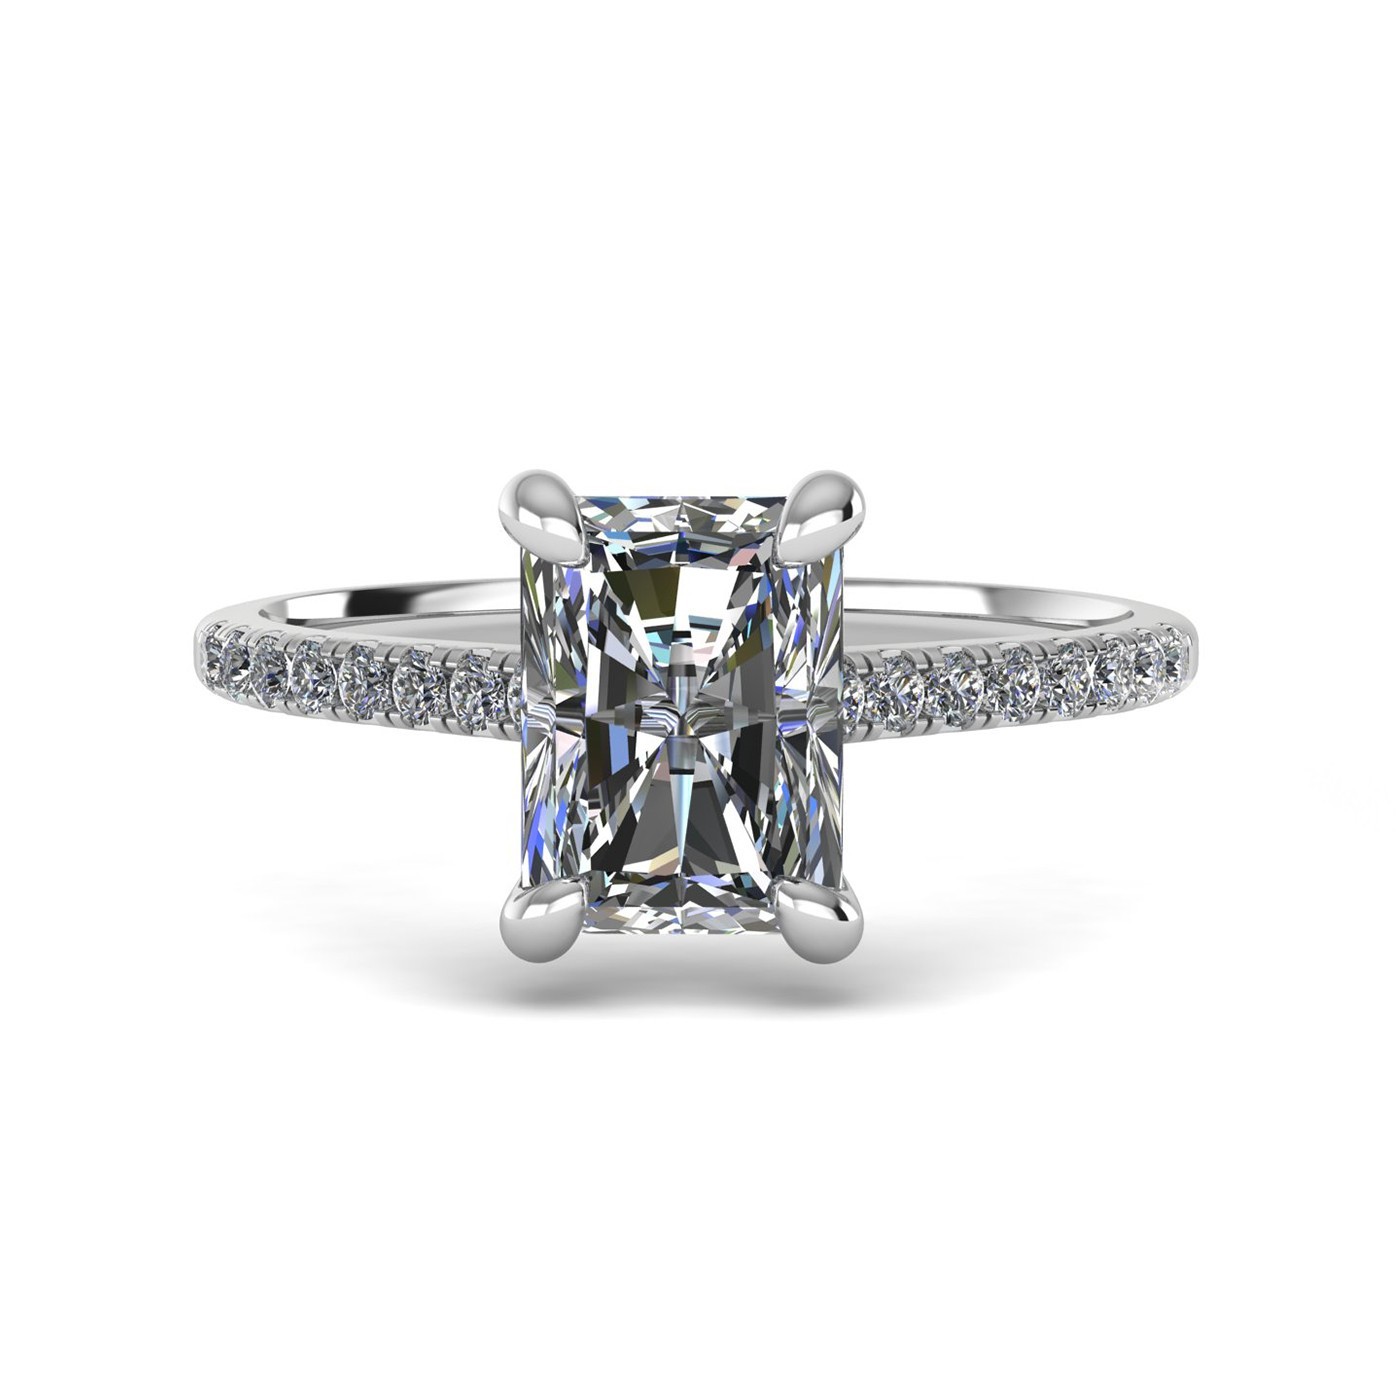 18k white gold  1,50 ct 4 prongs radiant cut diamond engagement ring with whisper thin pavÉ set band Photos & images